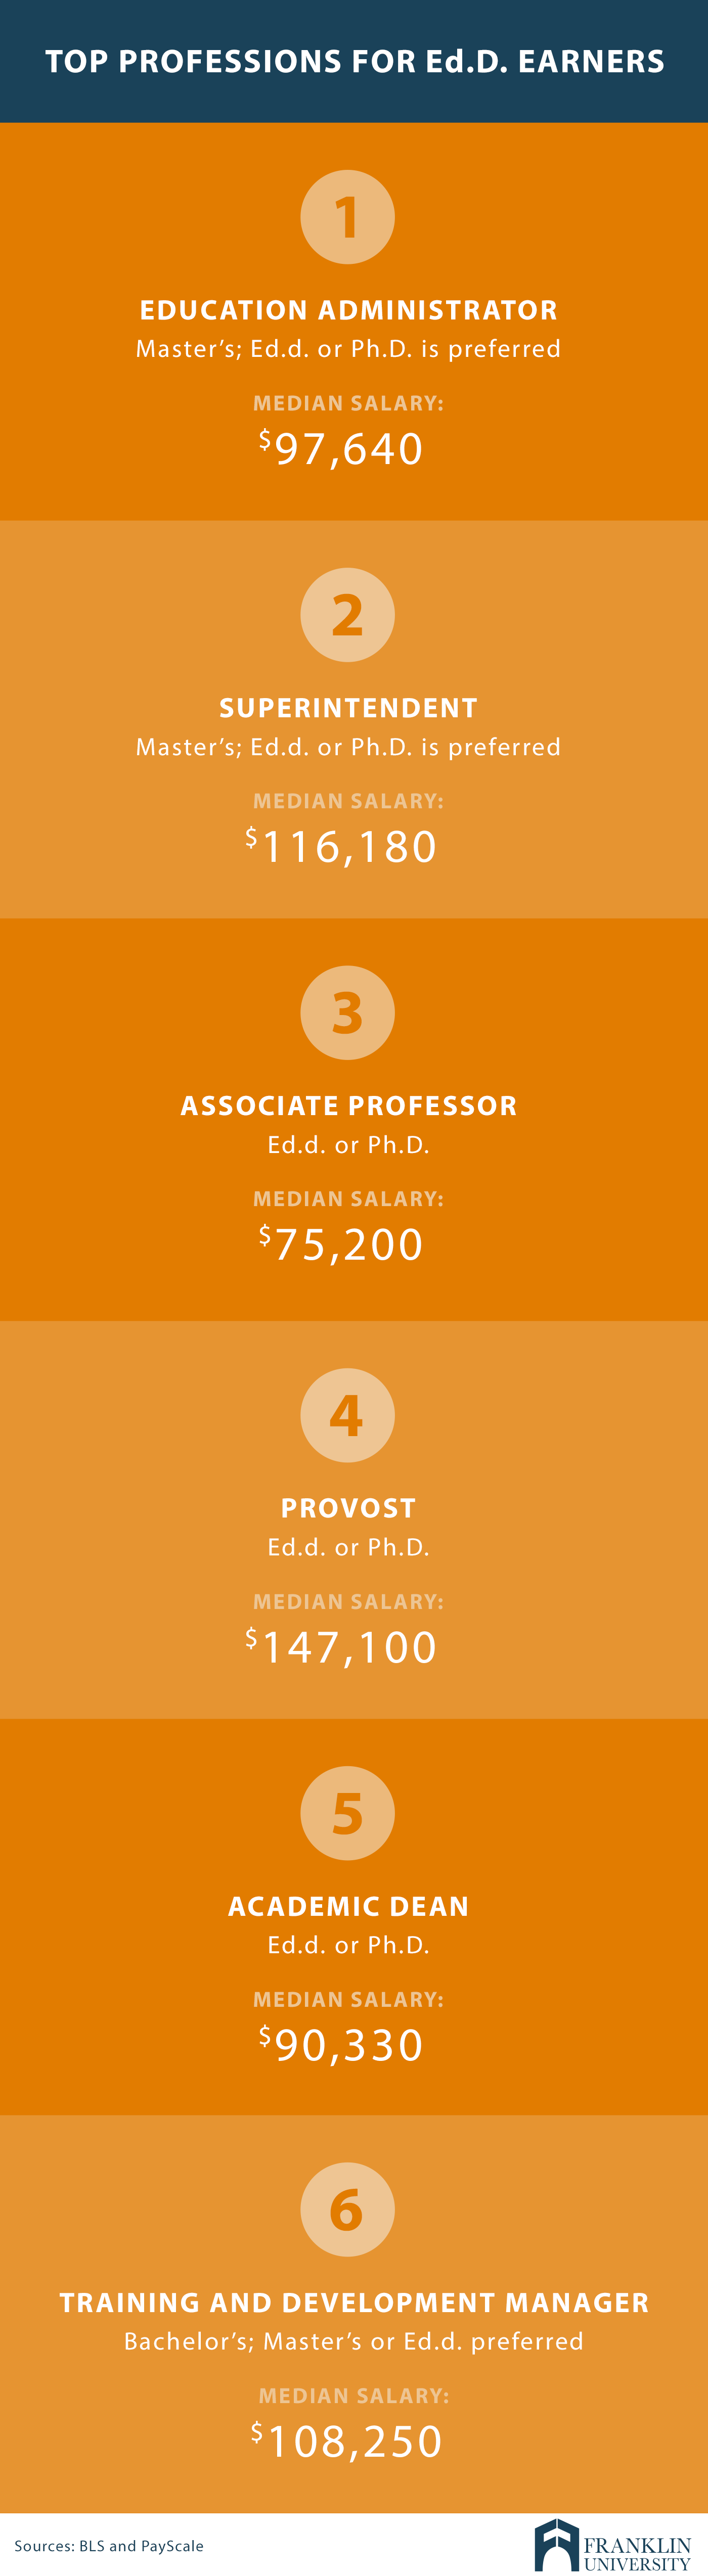 graphic describes top professions for Ed.D. earners